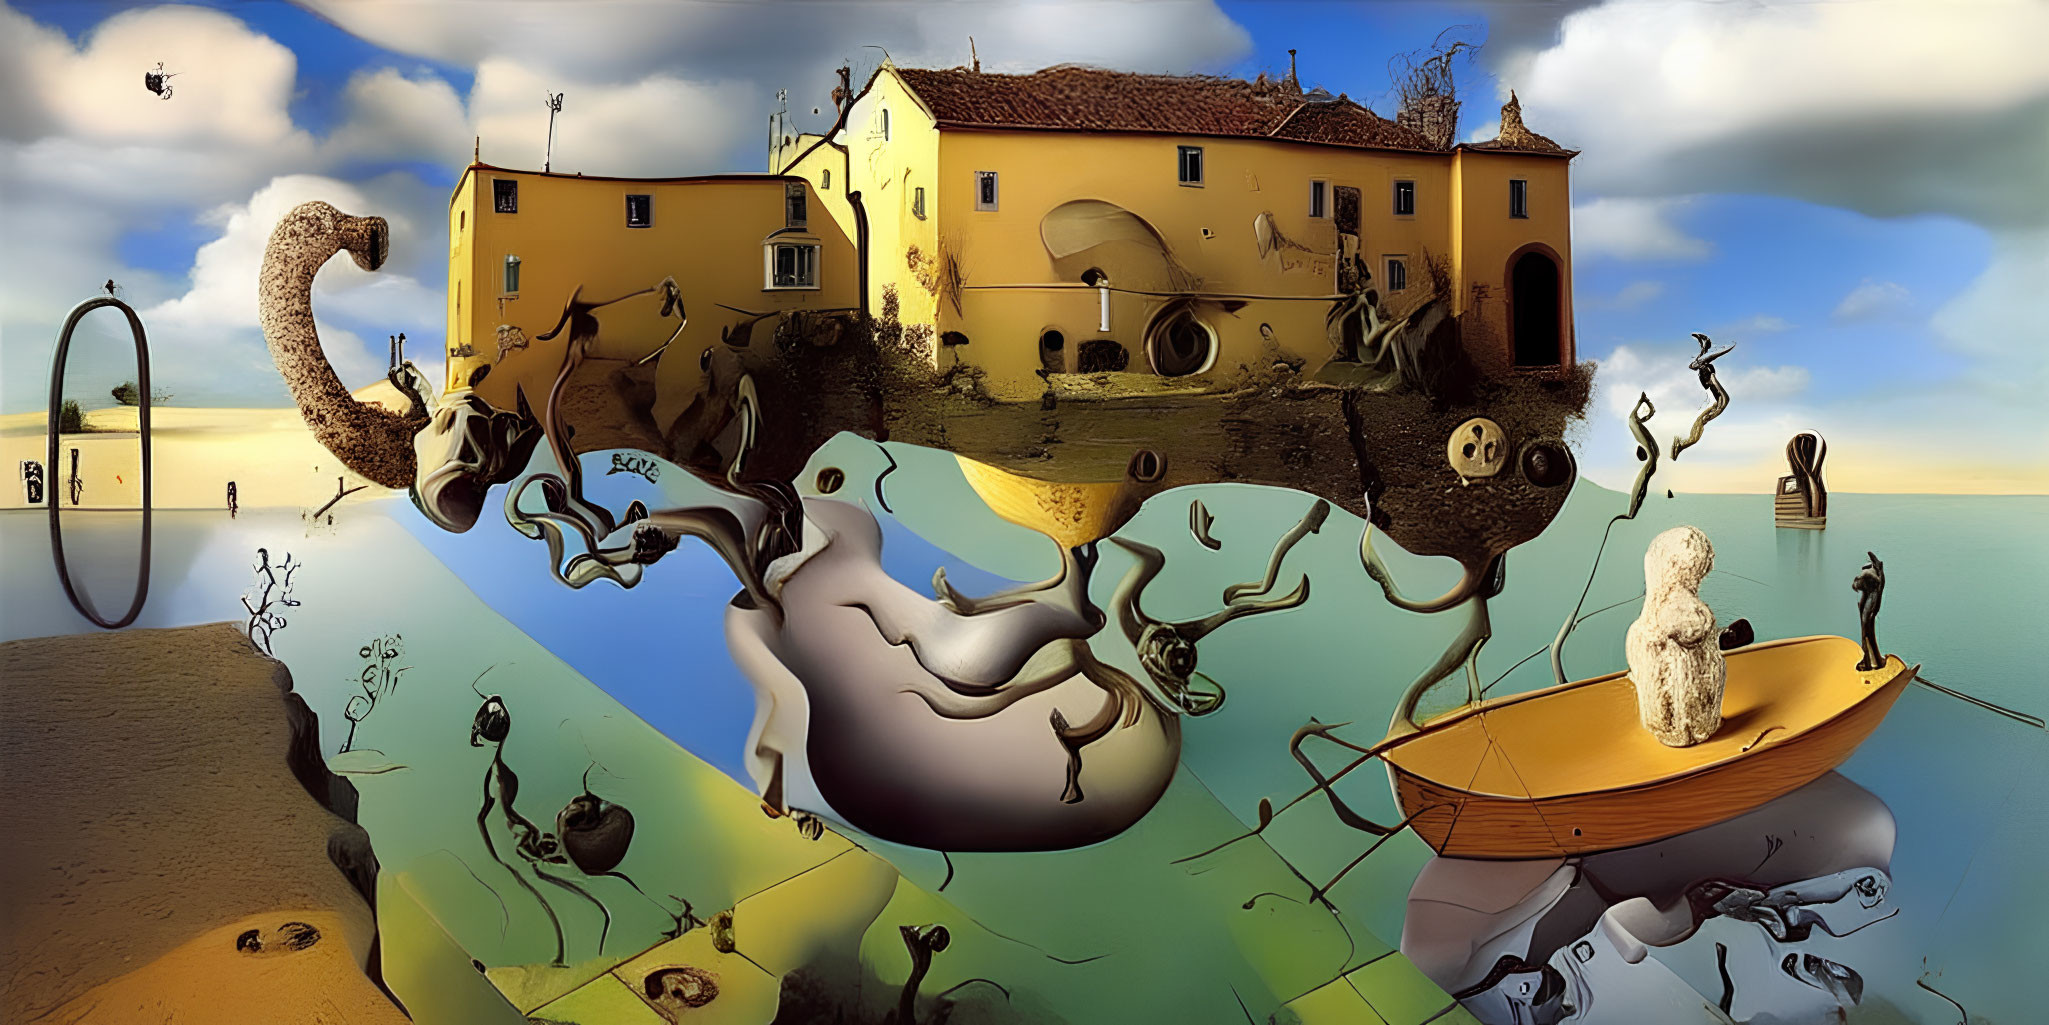 Surreal floating island with yellow building, melting clocks, tree, boat, and whimsical elements